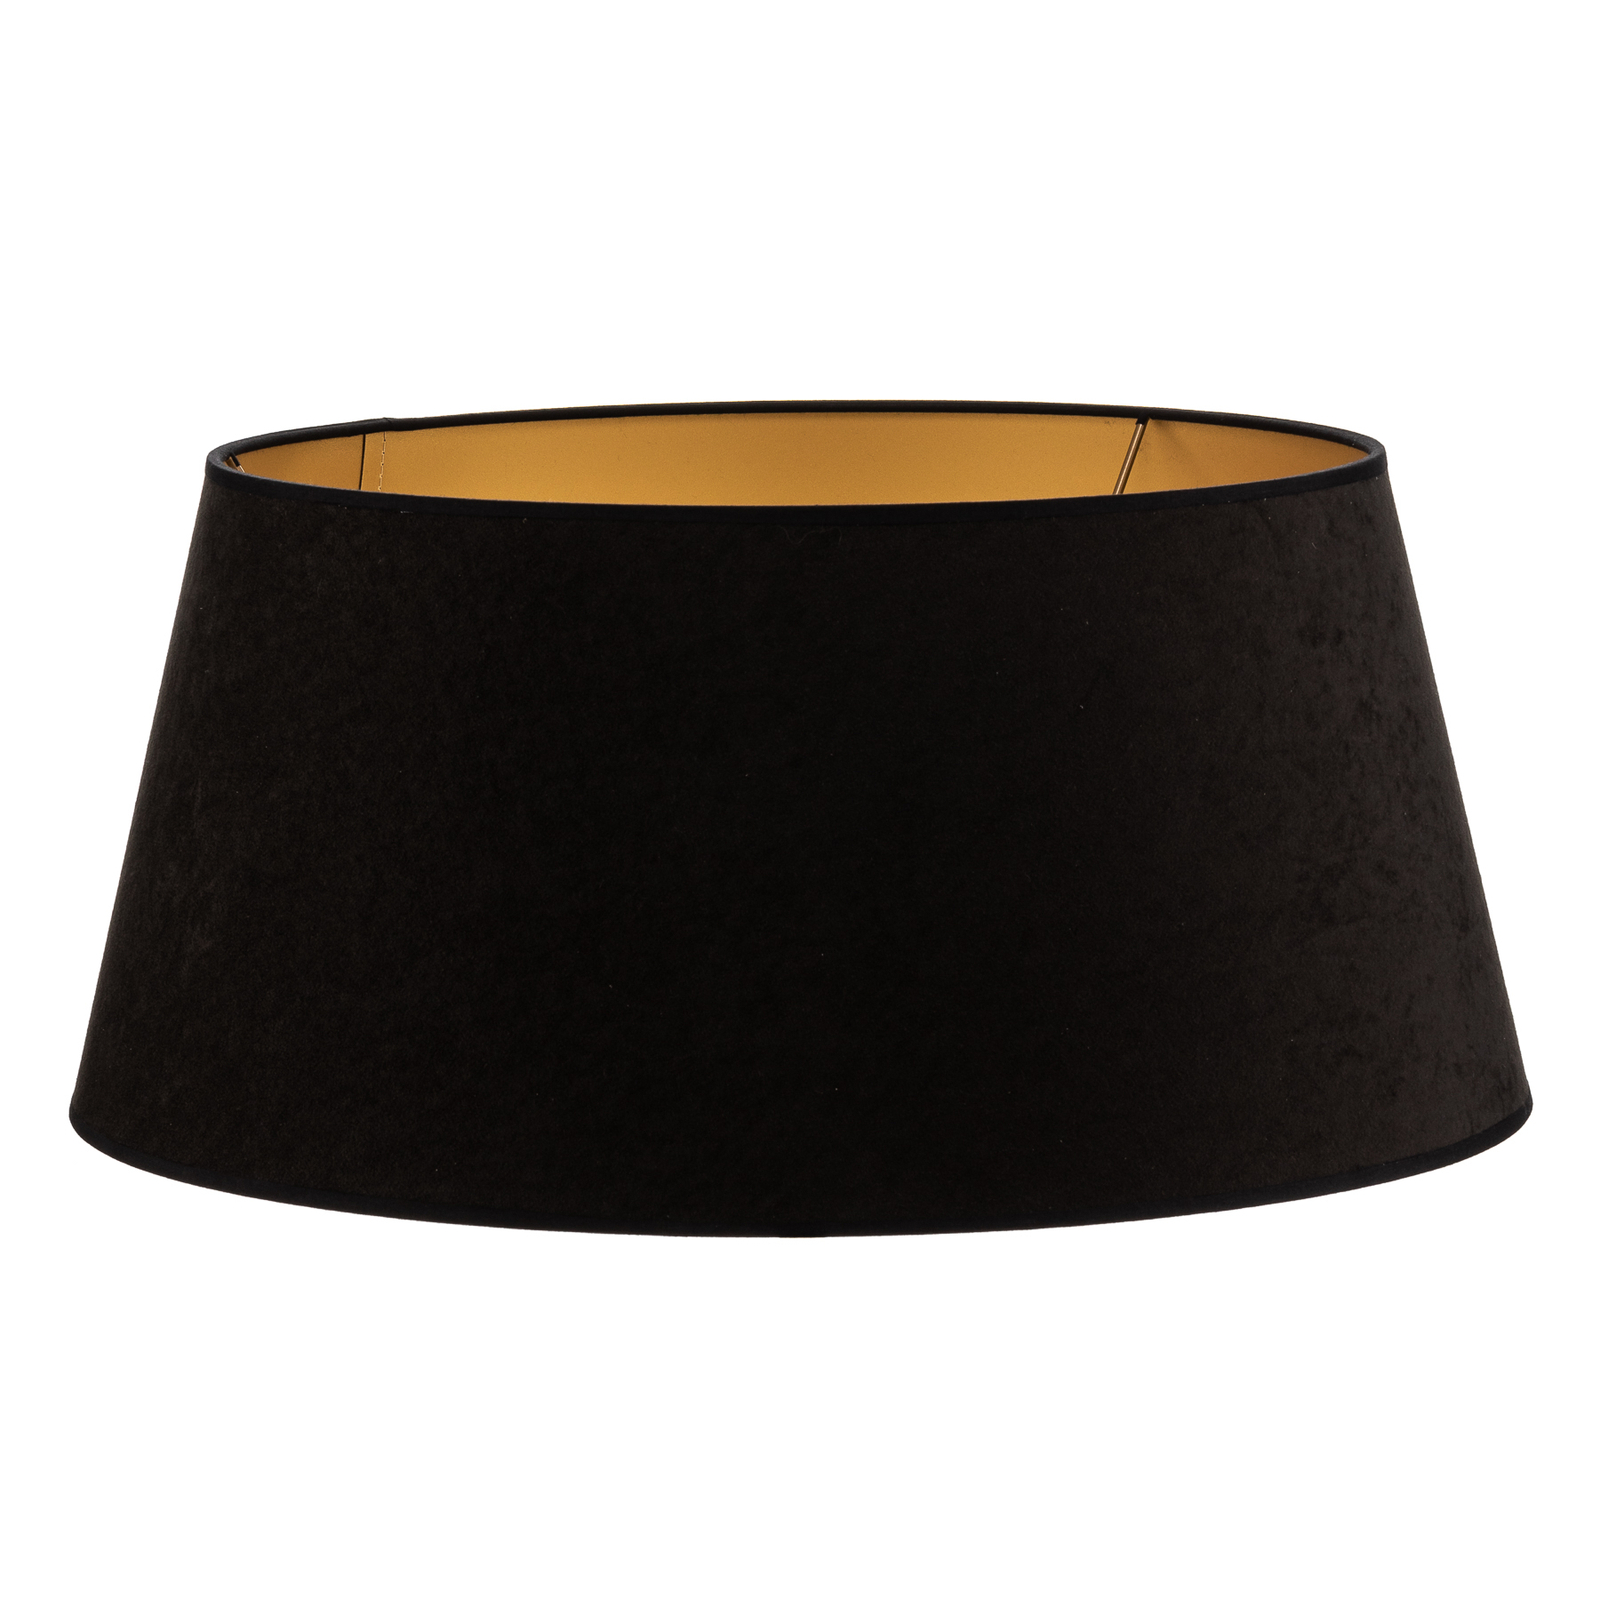 Cone lampshade height 25.5 cm, black/gold